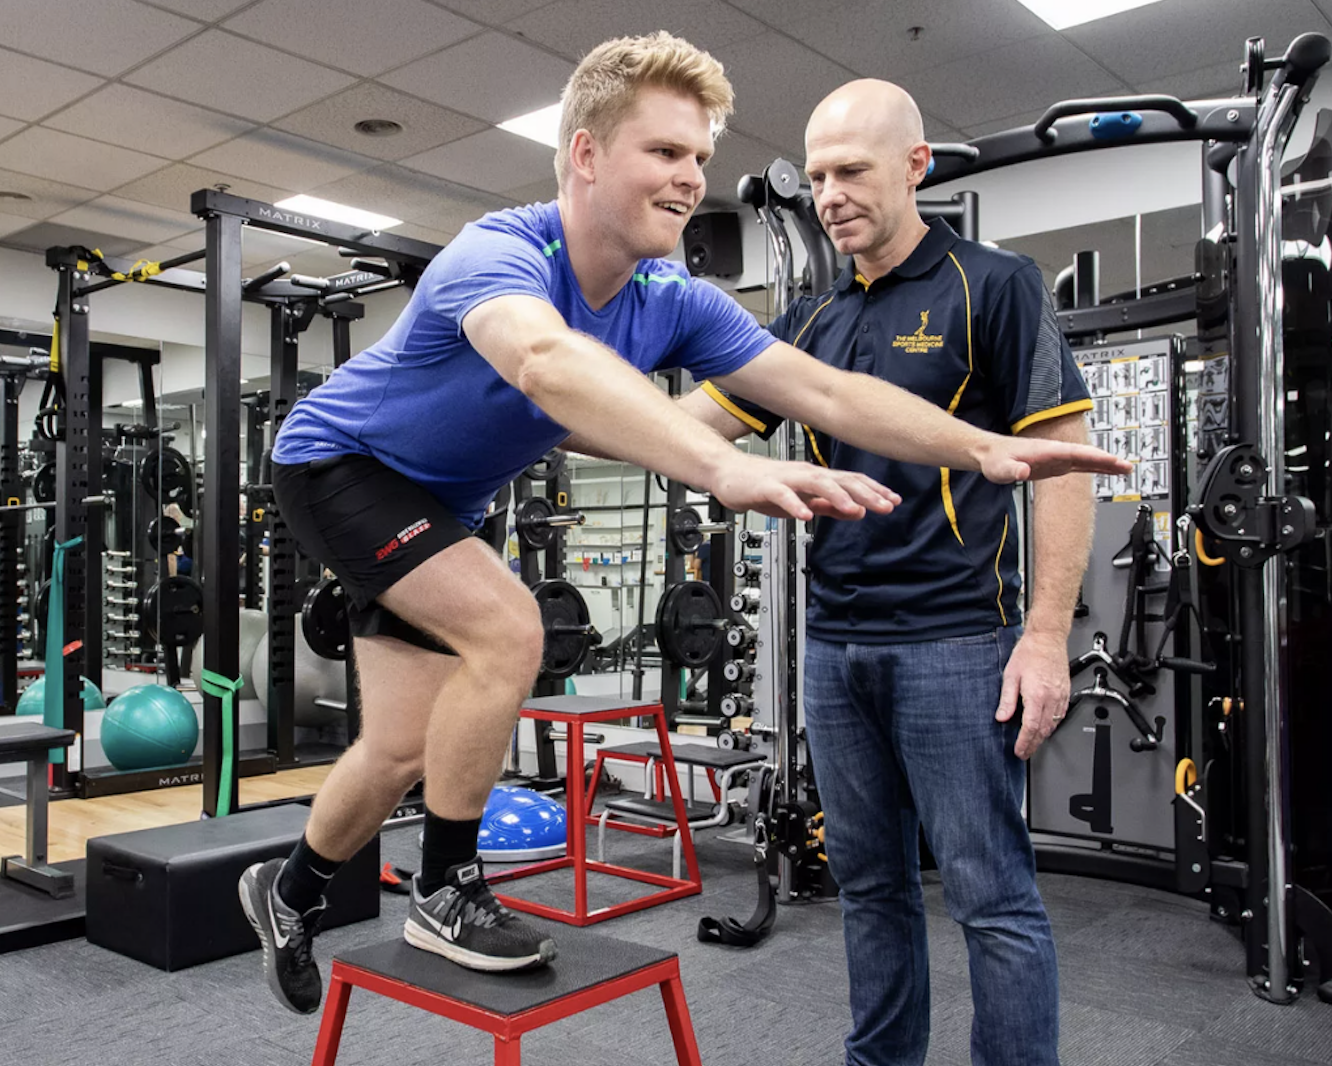 Mick Hughes supervising client with ACL post-reconstruction rehab, doing leg raises exercises on stool.